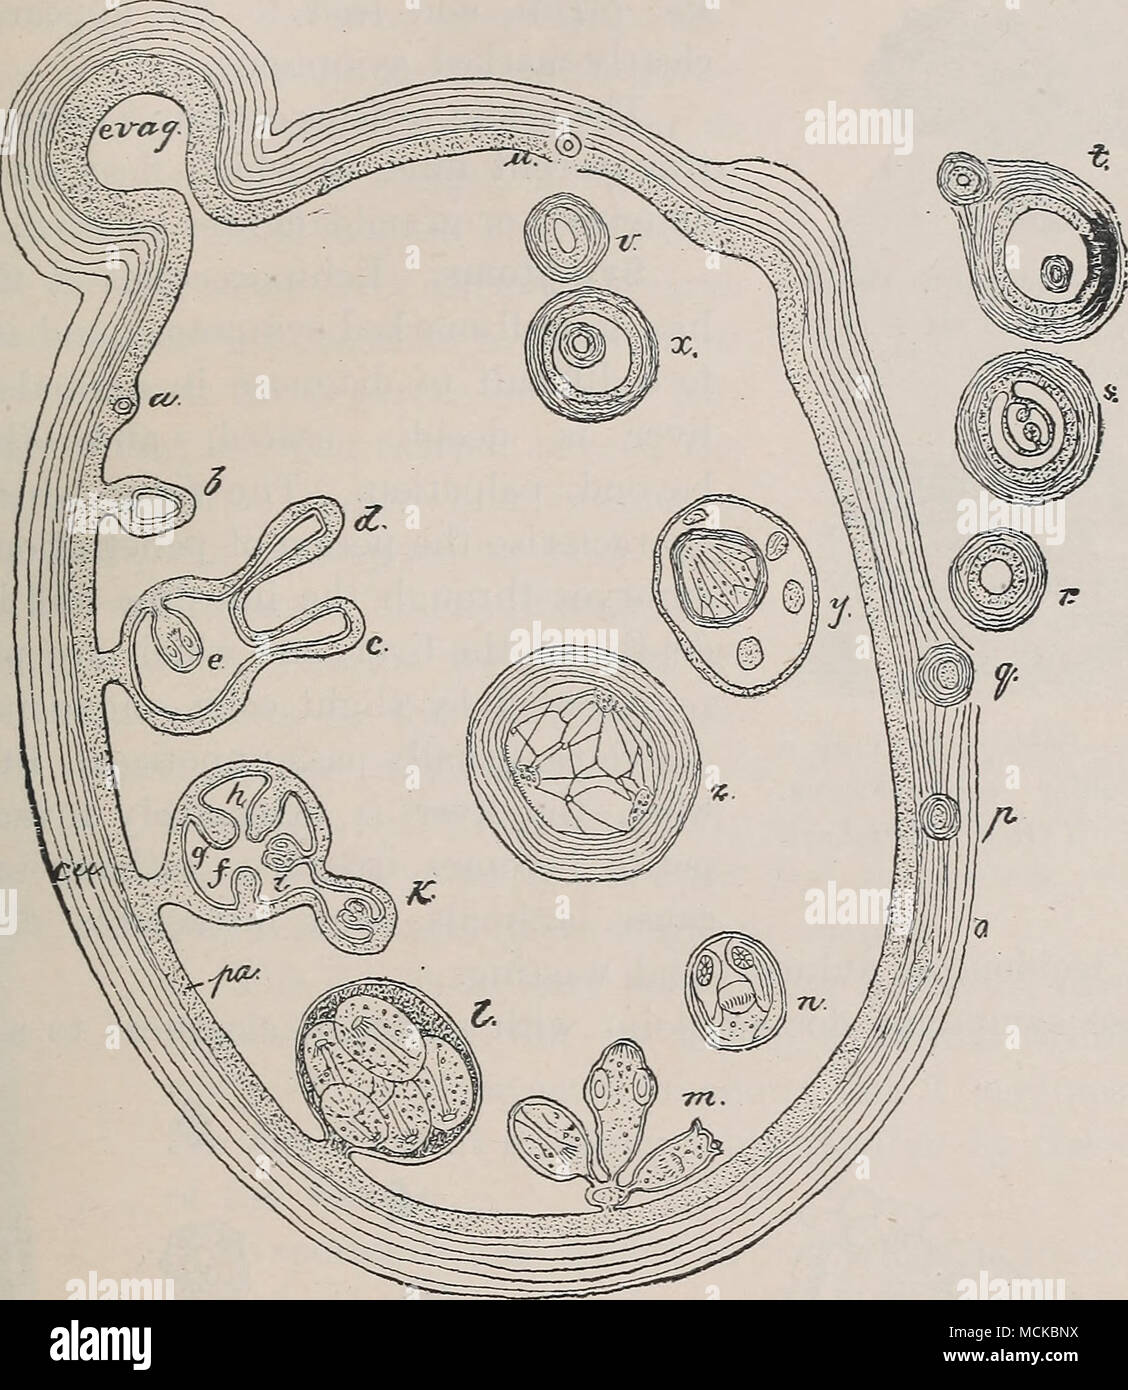 . Fig. 126.—Diagram of an echmococciis hydatid, cu, Thick external cuticle ; ]ja, parenchym (germinal) layer ; c, d, e, development of the heads, according to Leiickart; /, g, h, i, A-, development of the heads accord- ing to Moniez; Z, fully-developed brood capsule with heads ; m, the brood capsule has ruptured, and the heads hang into the lumen of hydatid ; n, liberated head floating in the hydatid ; o, p, q, r, s, mode of formation of secondary exogenous daughter cyst ; t, daughter cyst with one endogenous and one exogenous grand-daughter cyst ; 21, v, x, forma- tion of endogenous cyst, aft Stock Photo